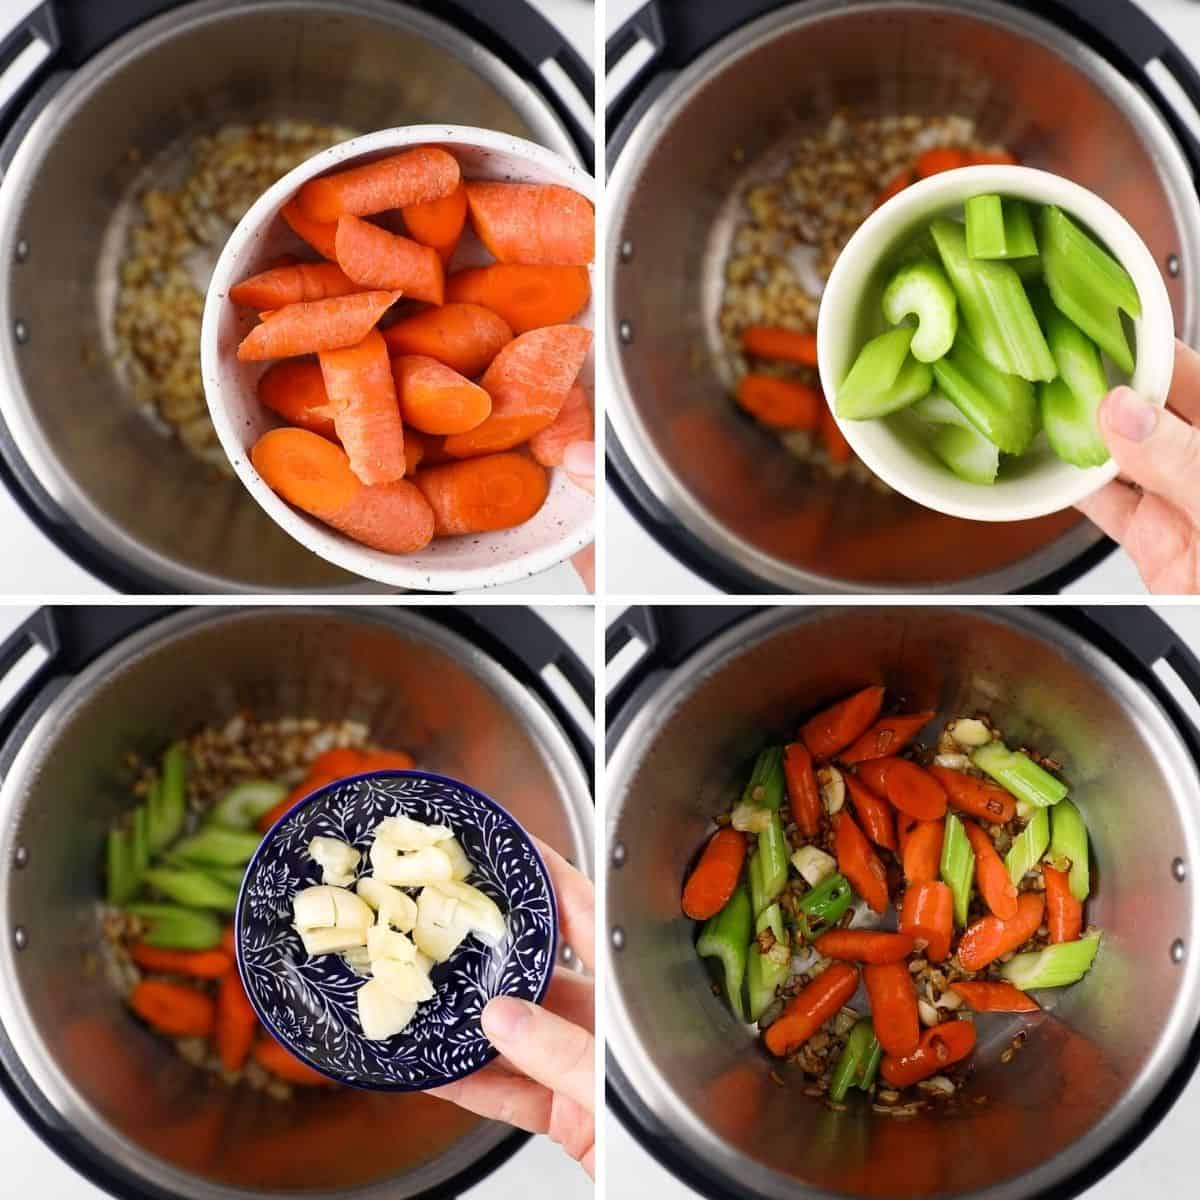 Adding chopped carrots, celery, and garlic to a pot.